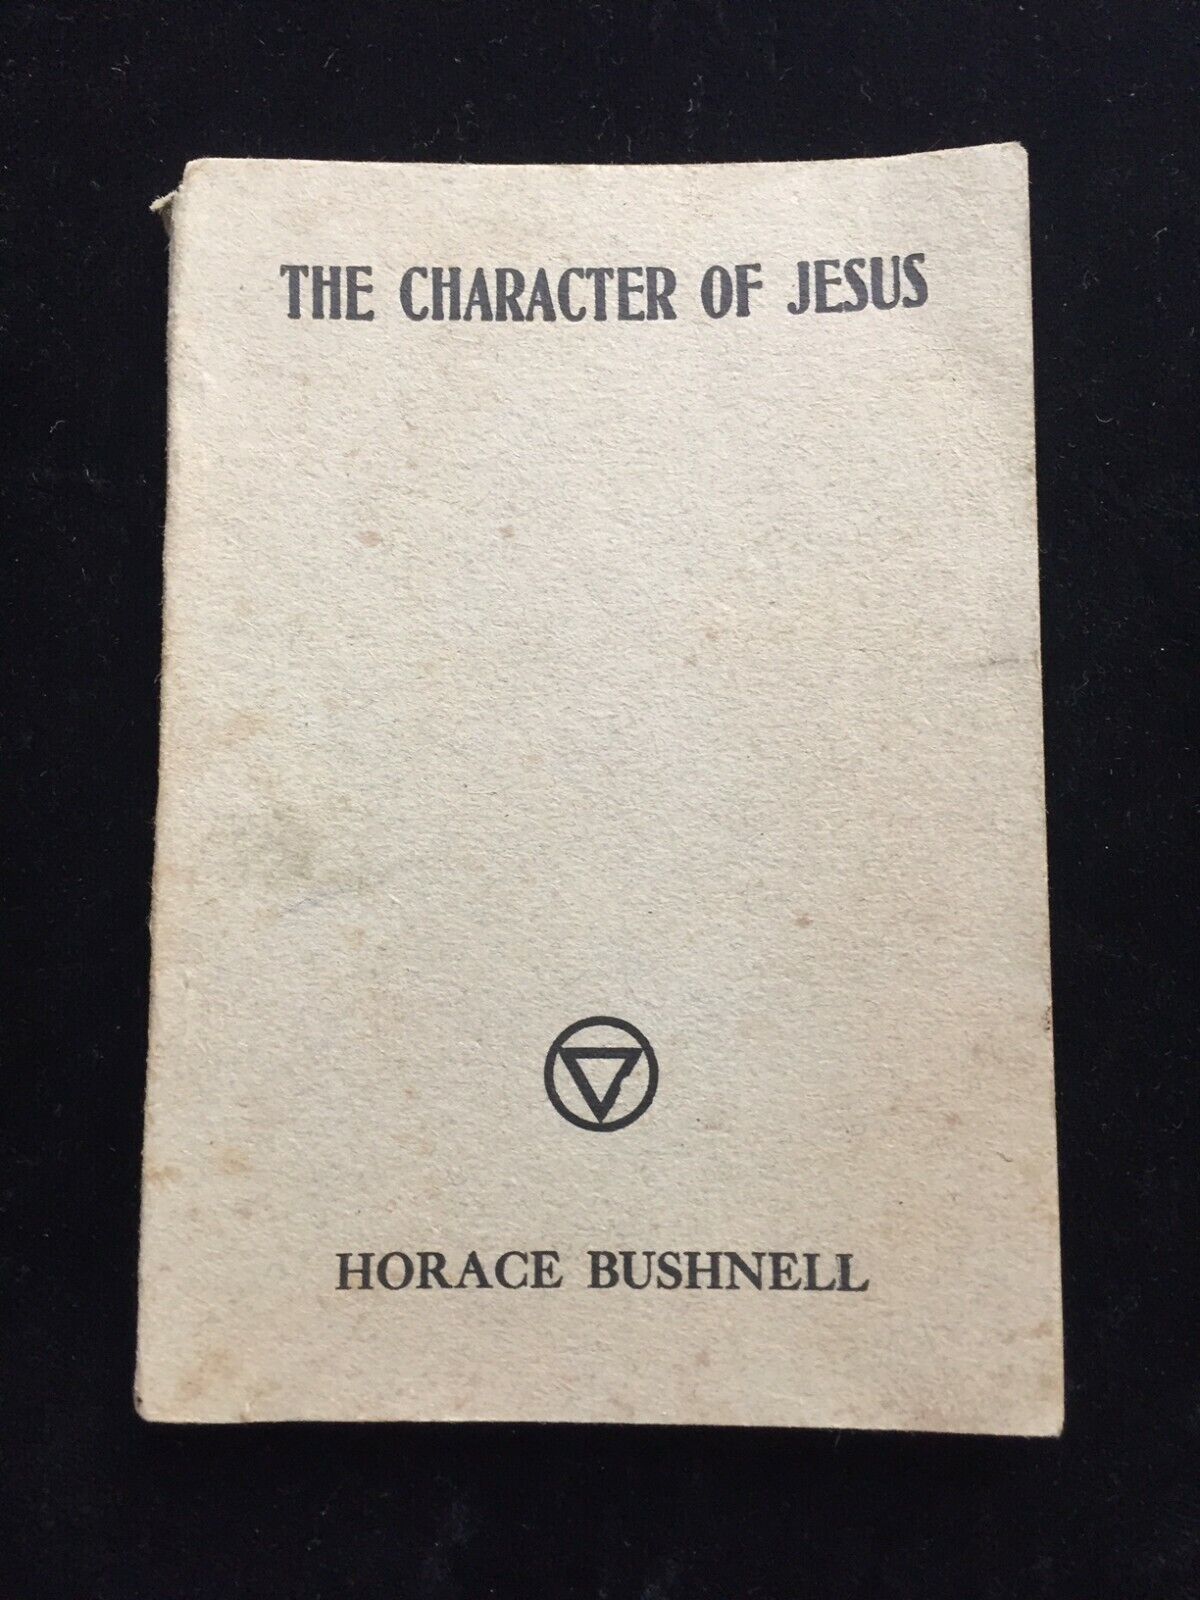 The Character of Jesus by Horace Bushnell 1917  small  4 X 6 inches